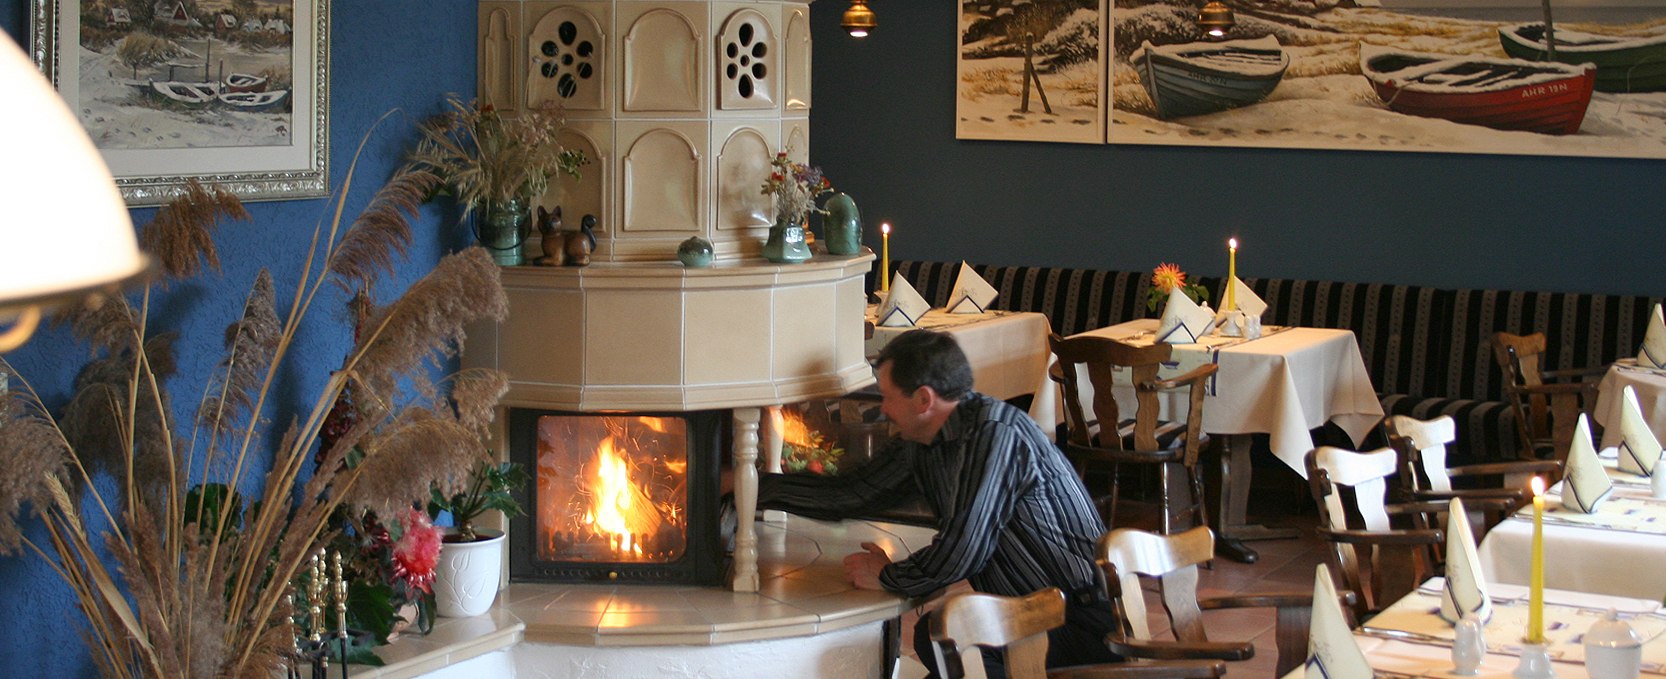 Cozy hours by the fireplace enchant at the end of a cold winter day, © Robert Niche